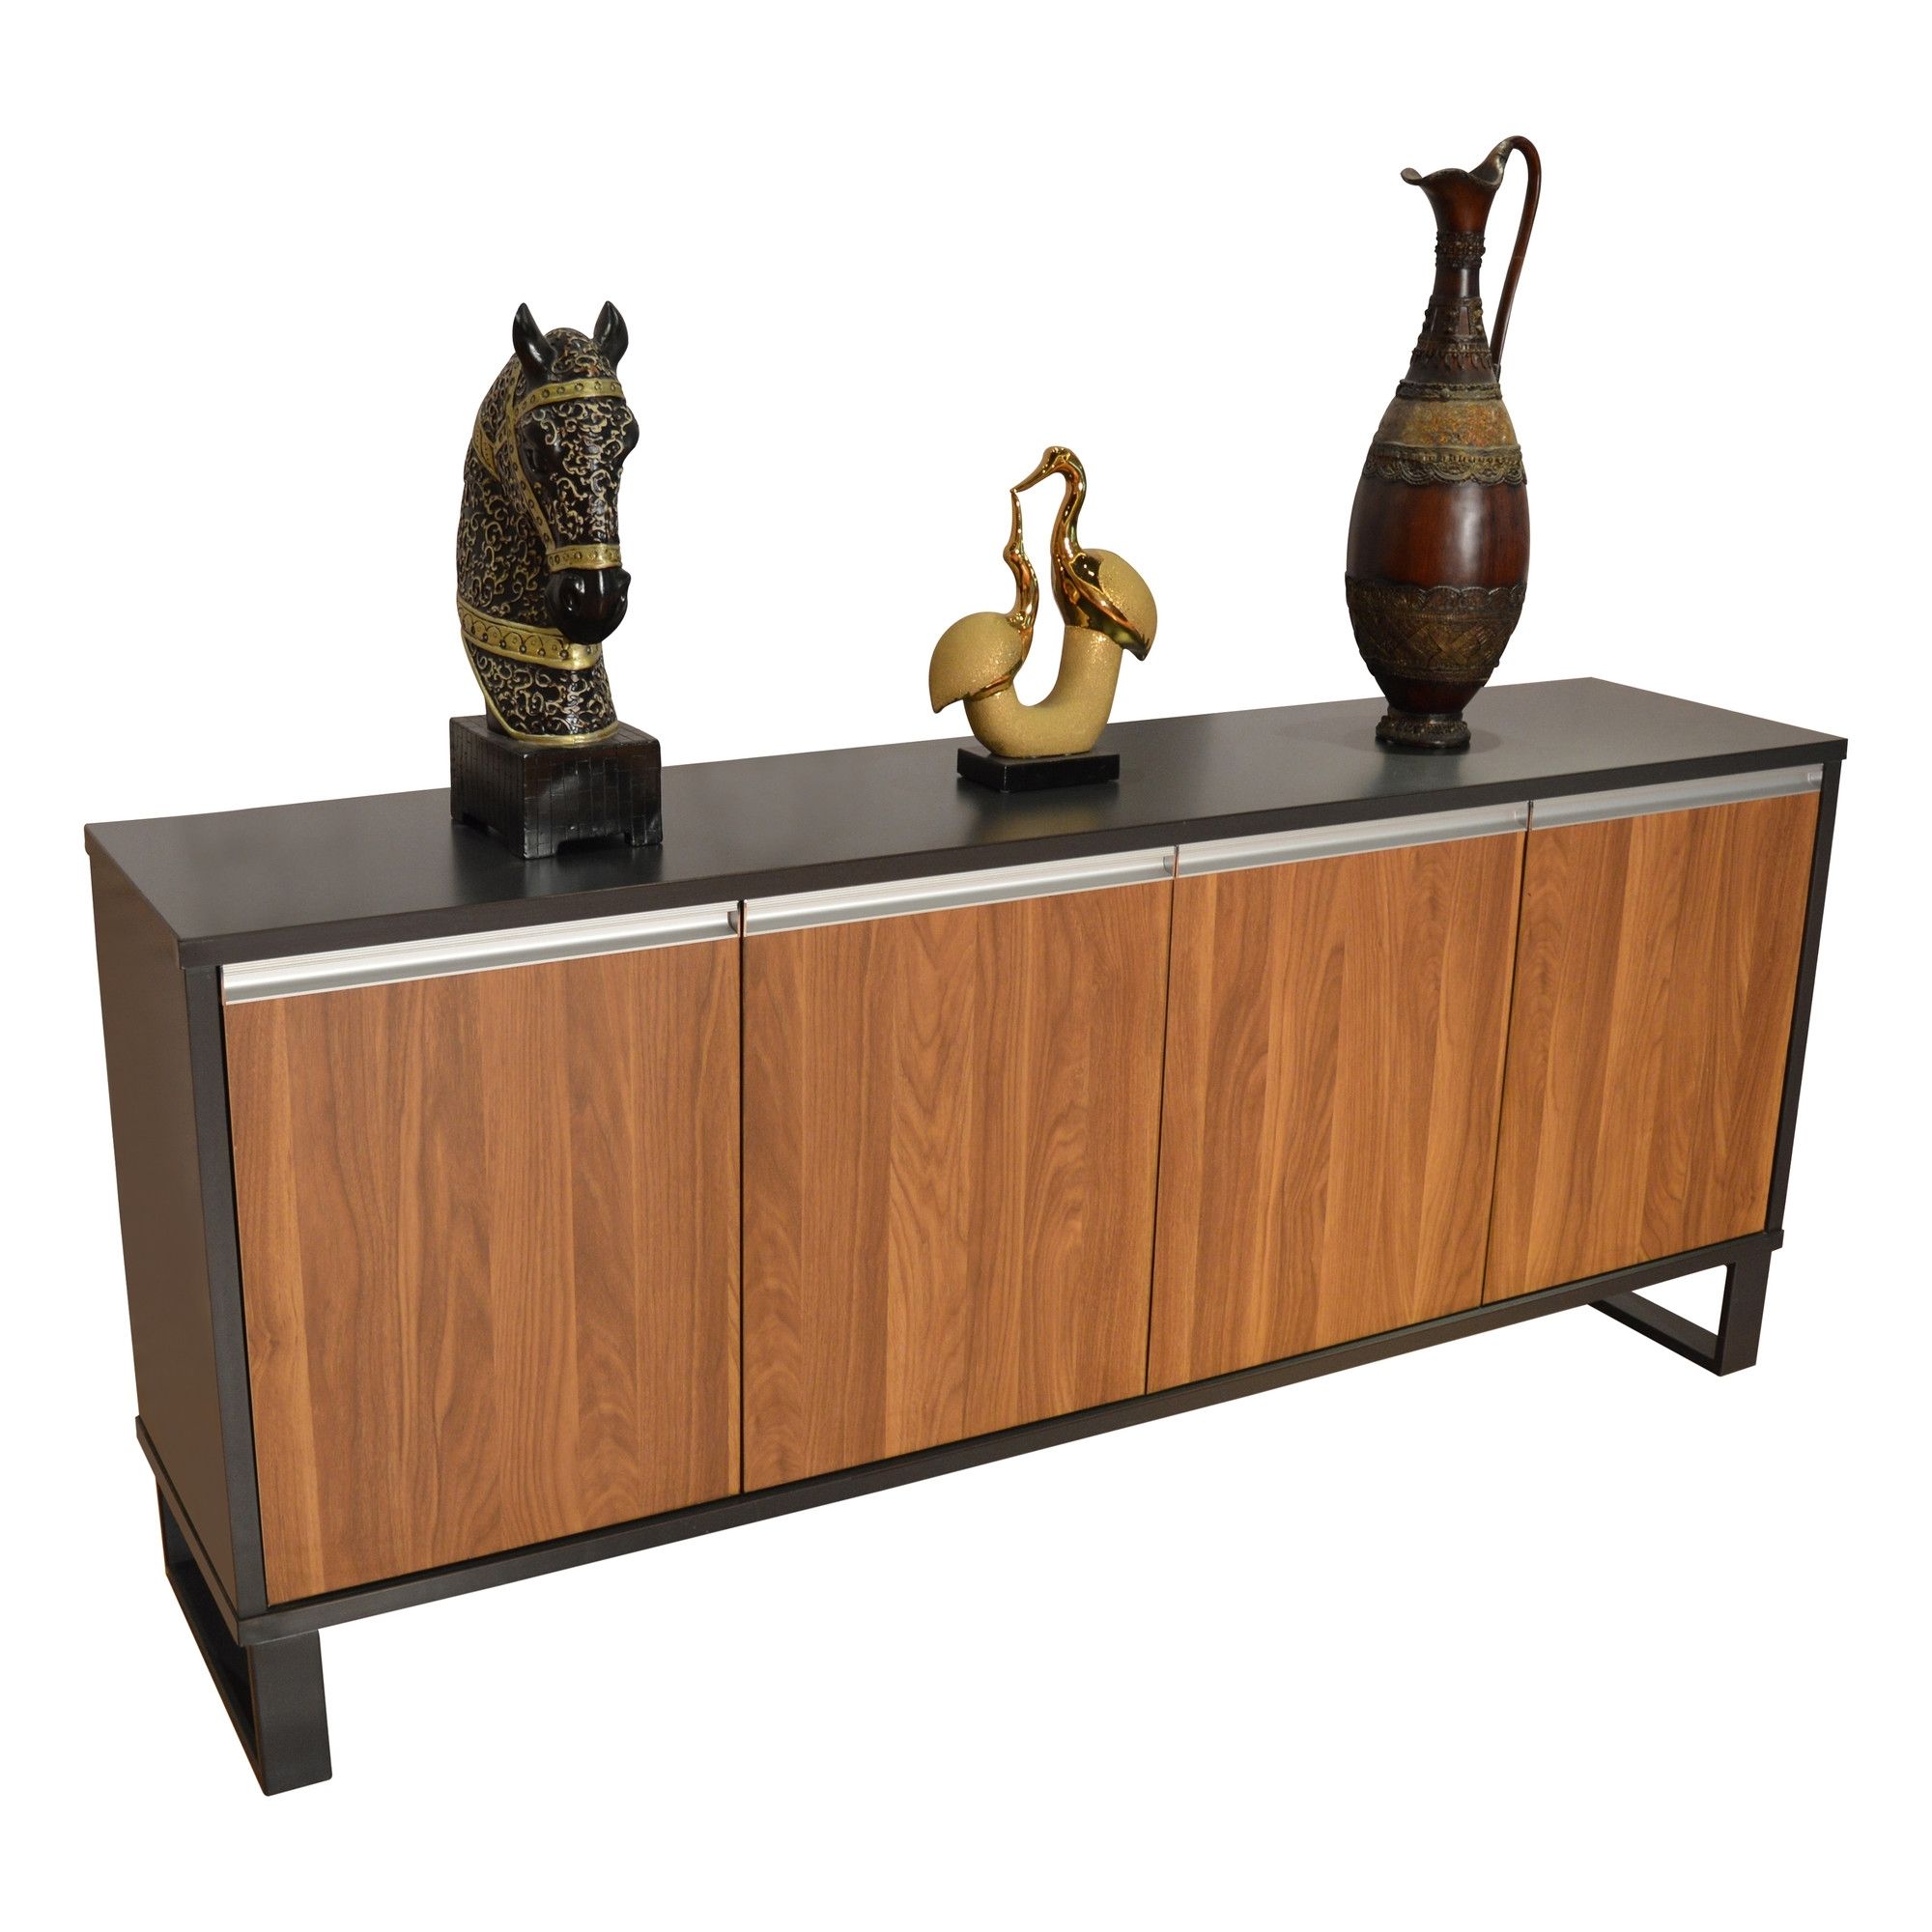 Aled Sideboard Cabinet | Temple & Webster For Best And Newest Logan Sideboards (View 15 of 20)